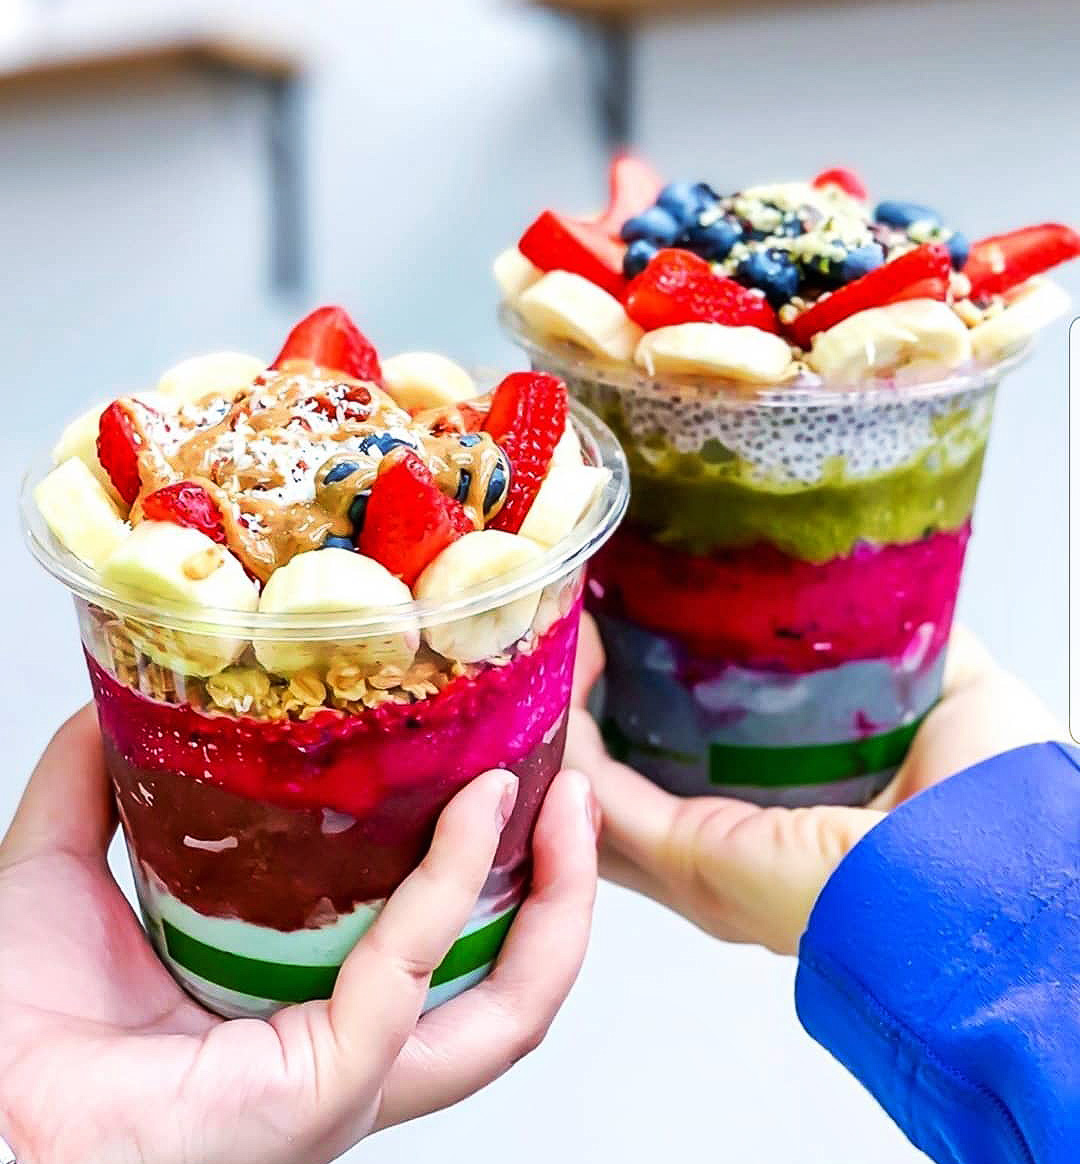 acai bowl with berries, banana and toppings